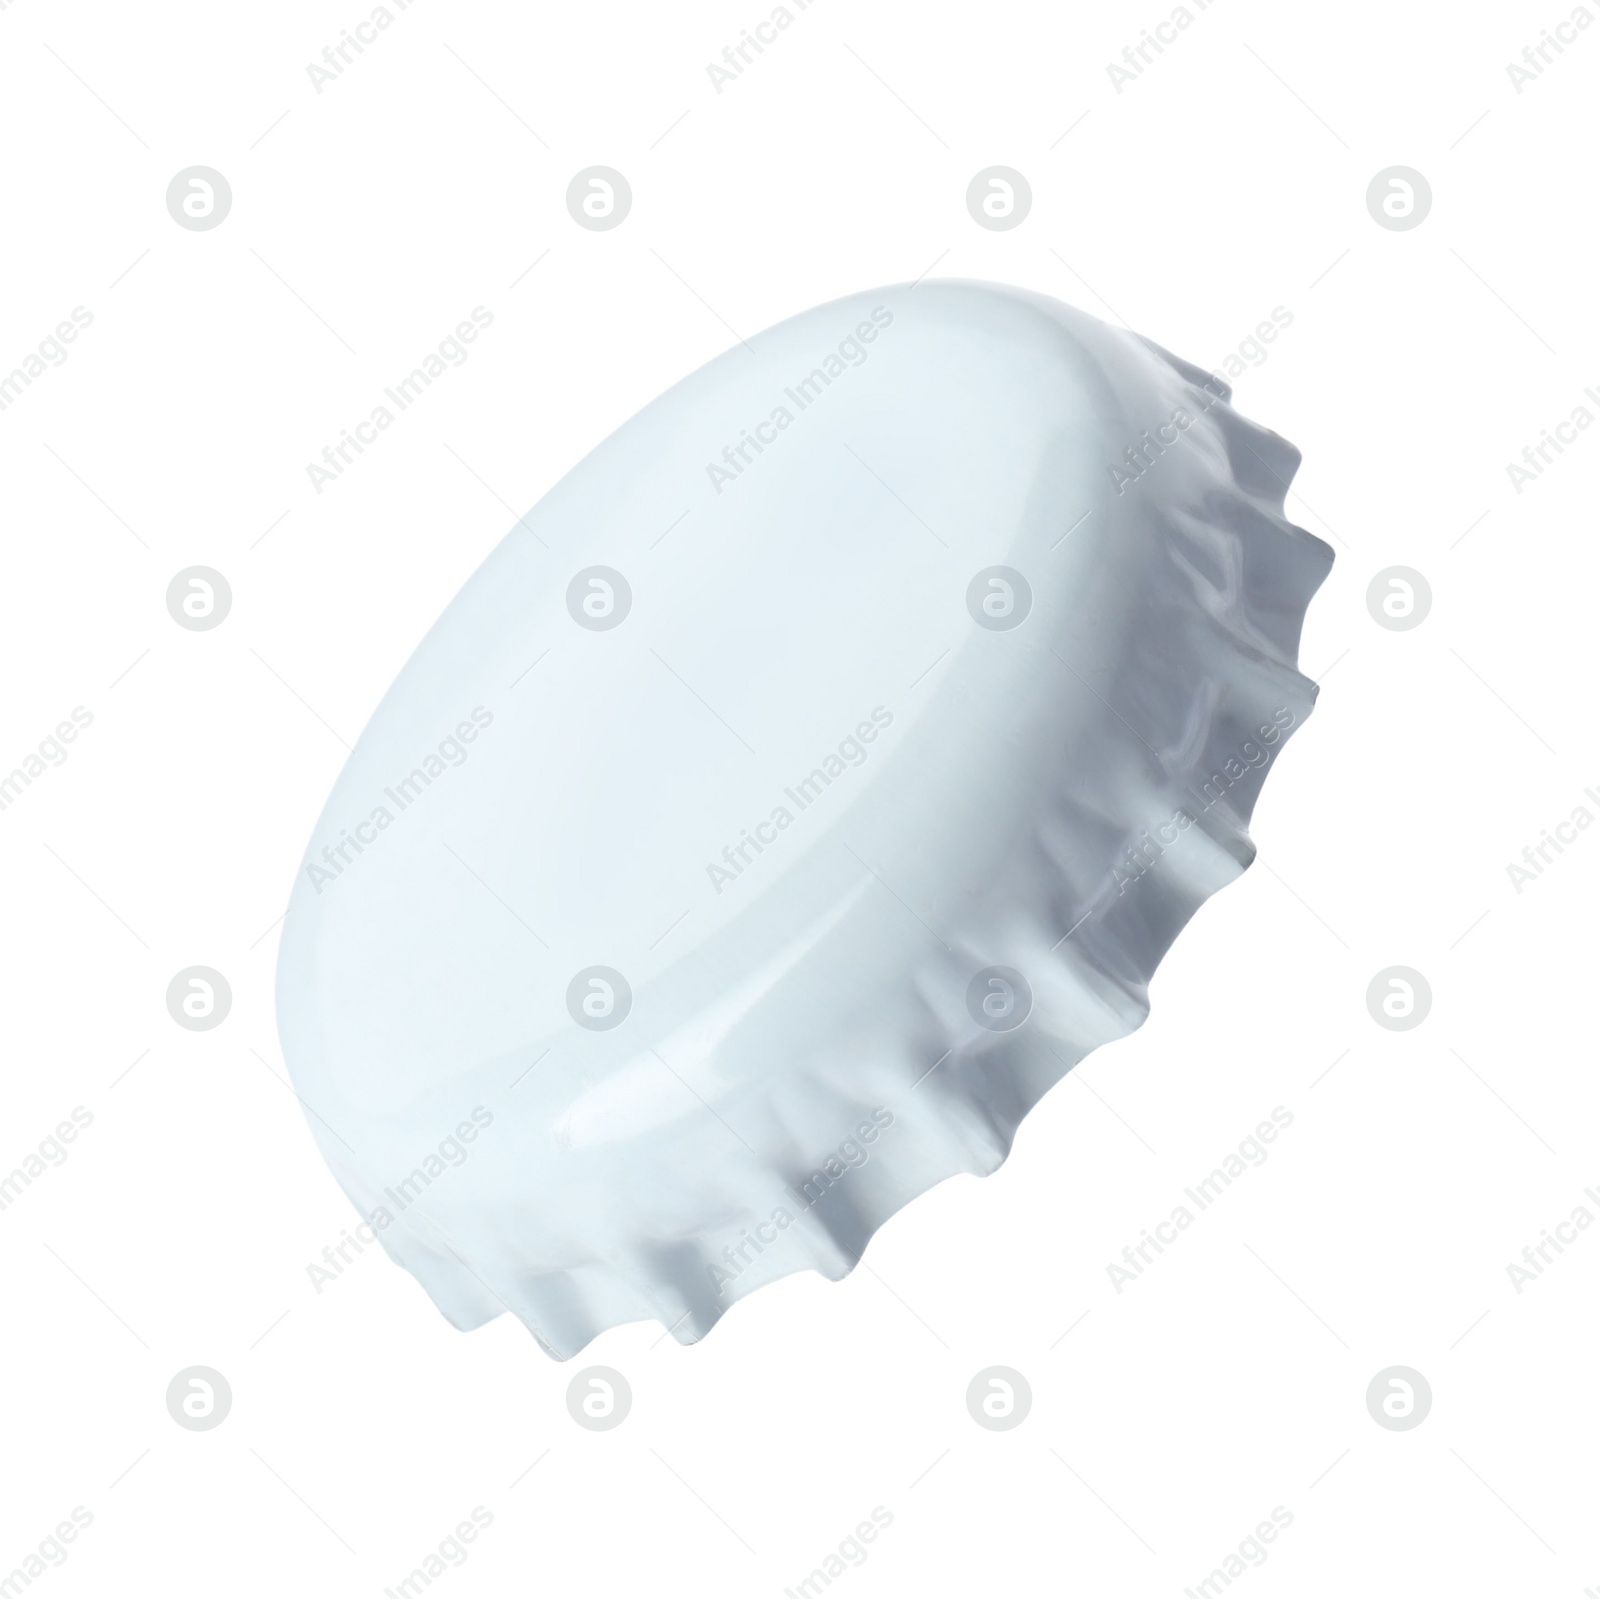 Photo of One blank beer bottle cap isolated on white